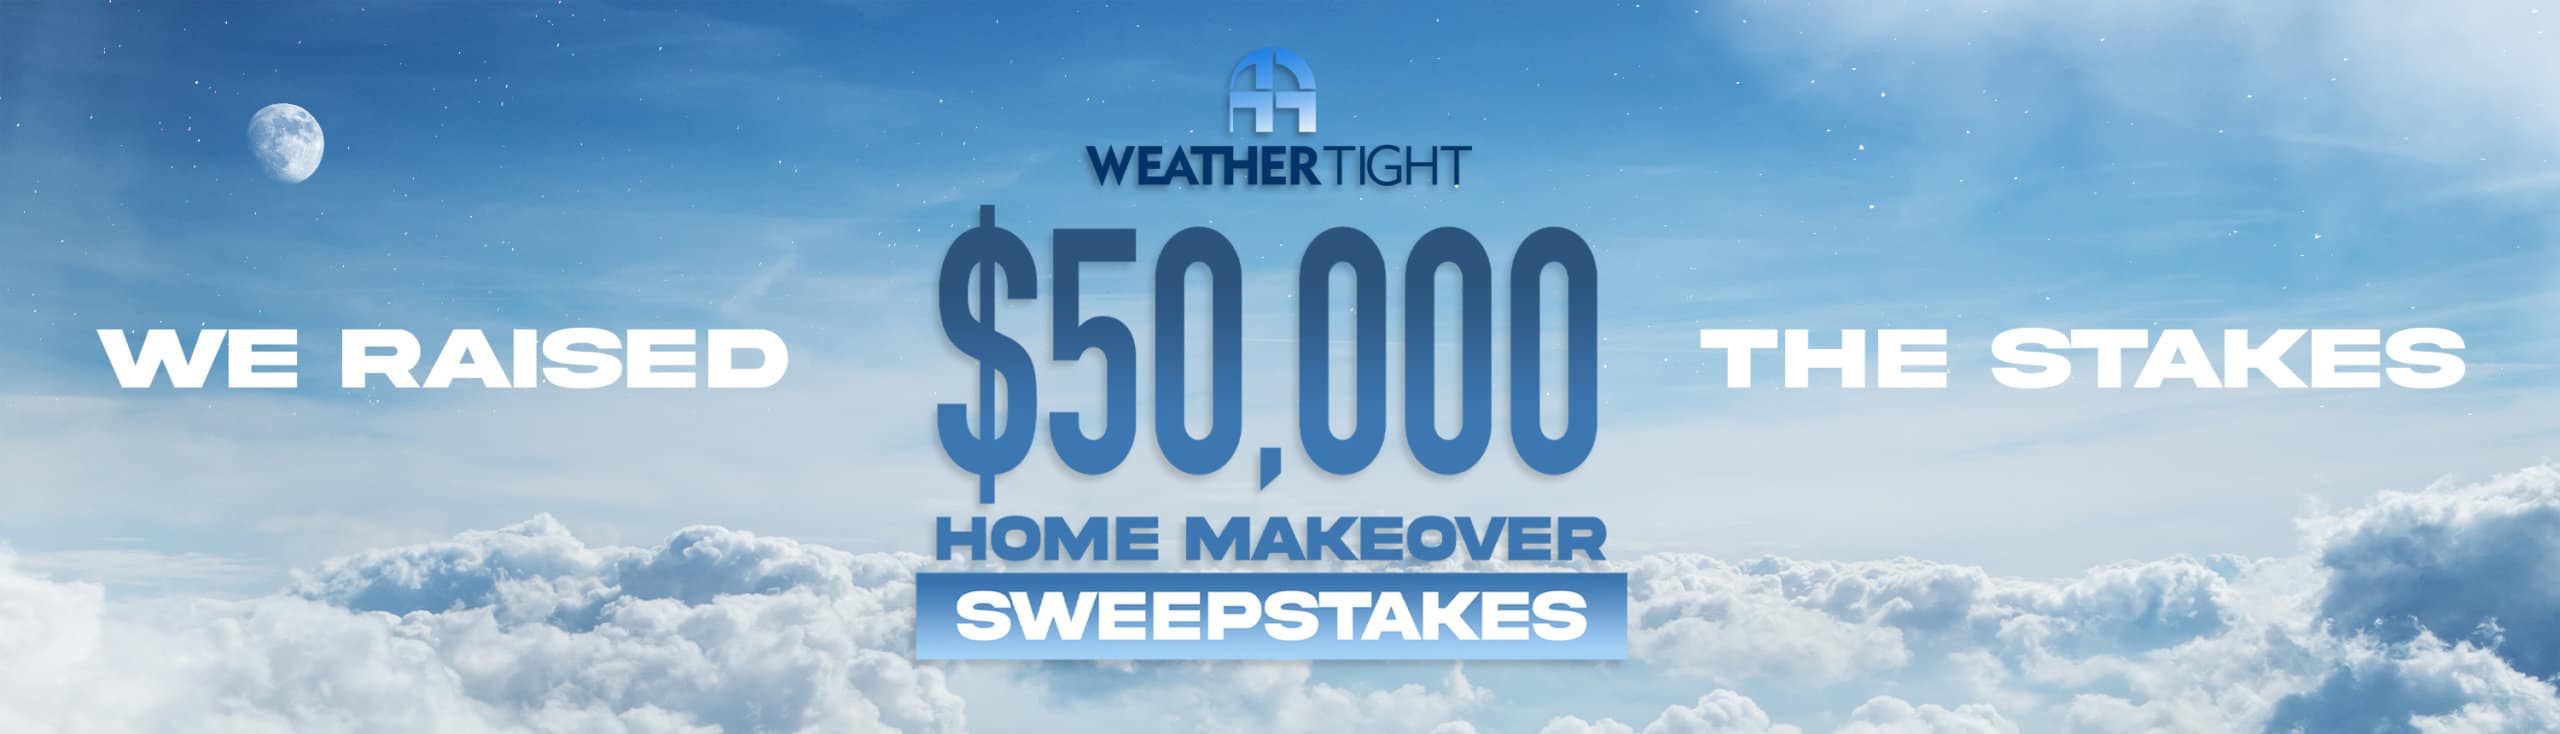 Weather Tight Corporation's $50,000 Home Makeover Sweepstakes